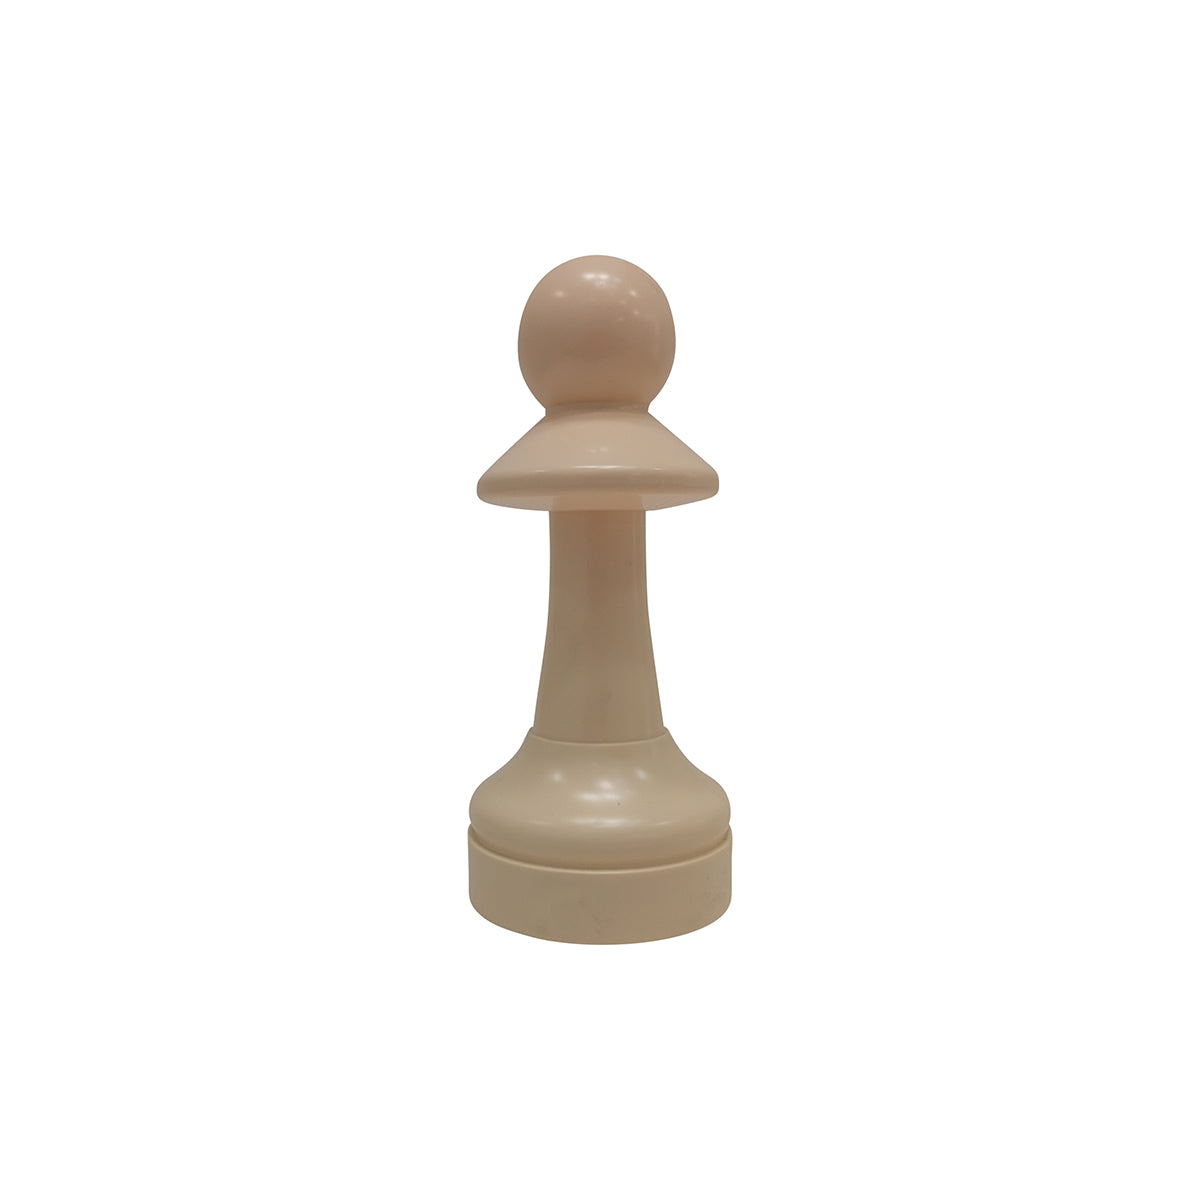 Giant Garden Chess 43cm Replacement Pieces Pawn